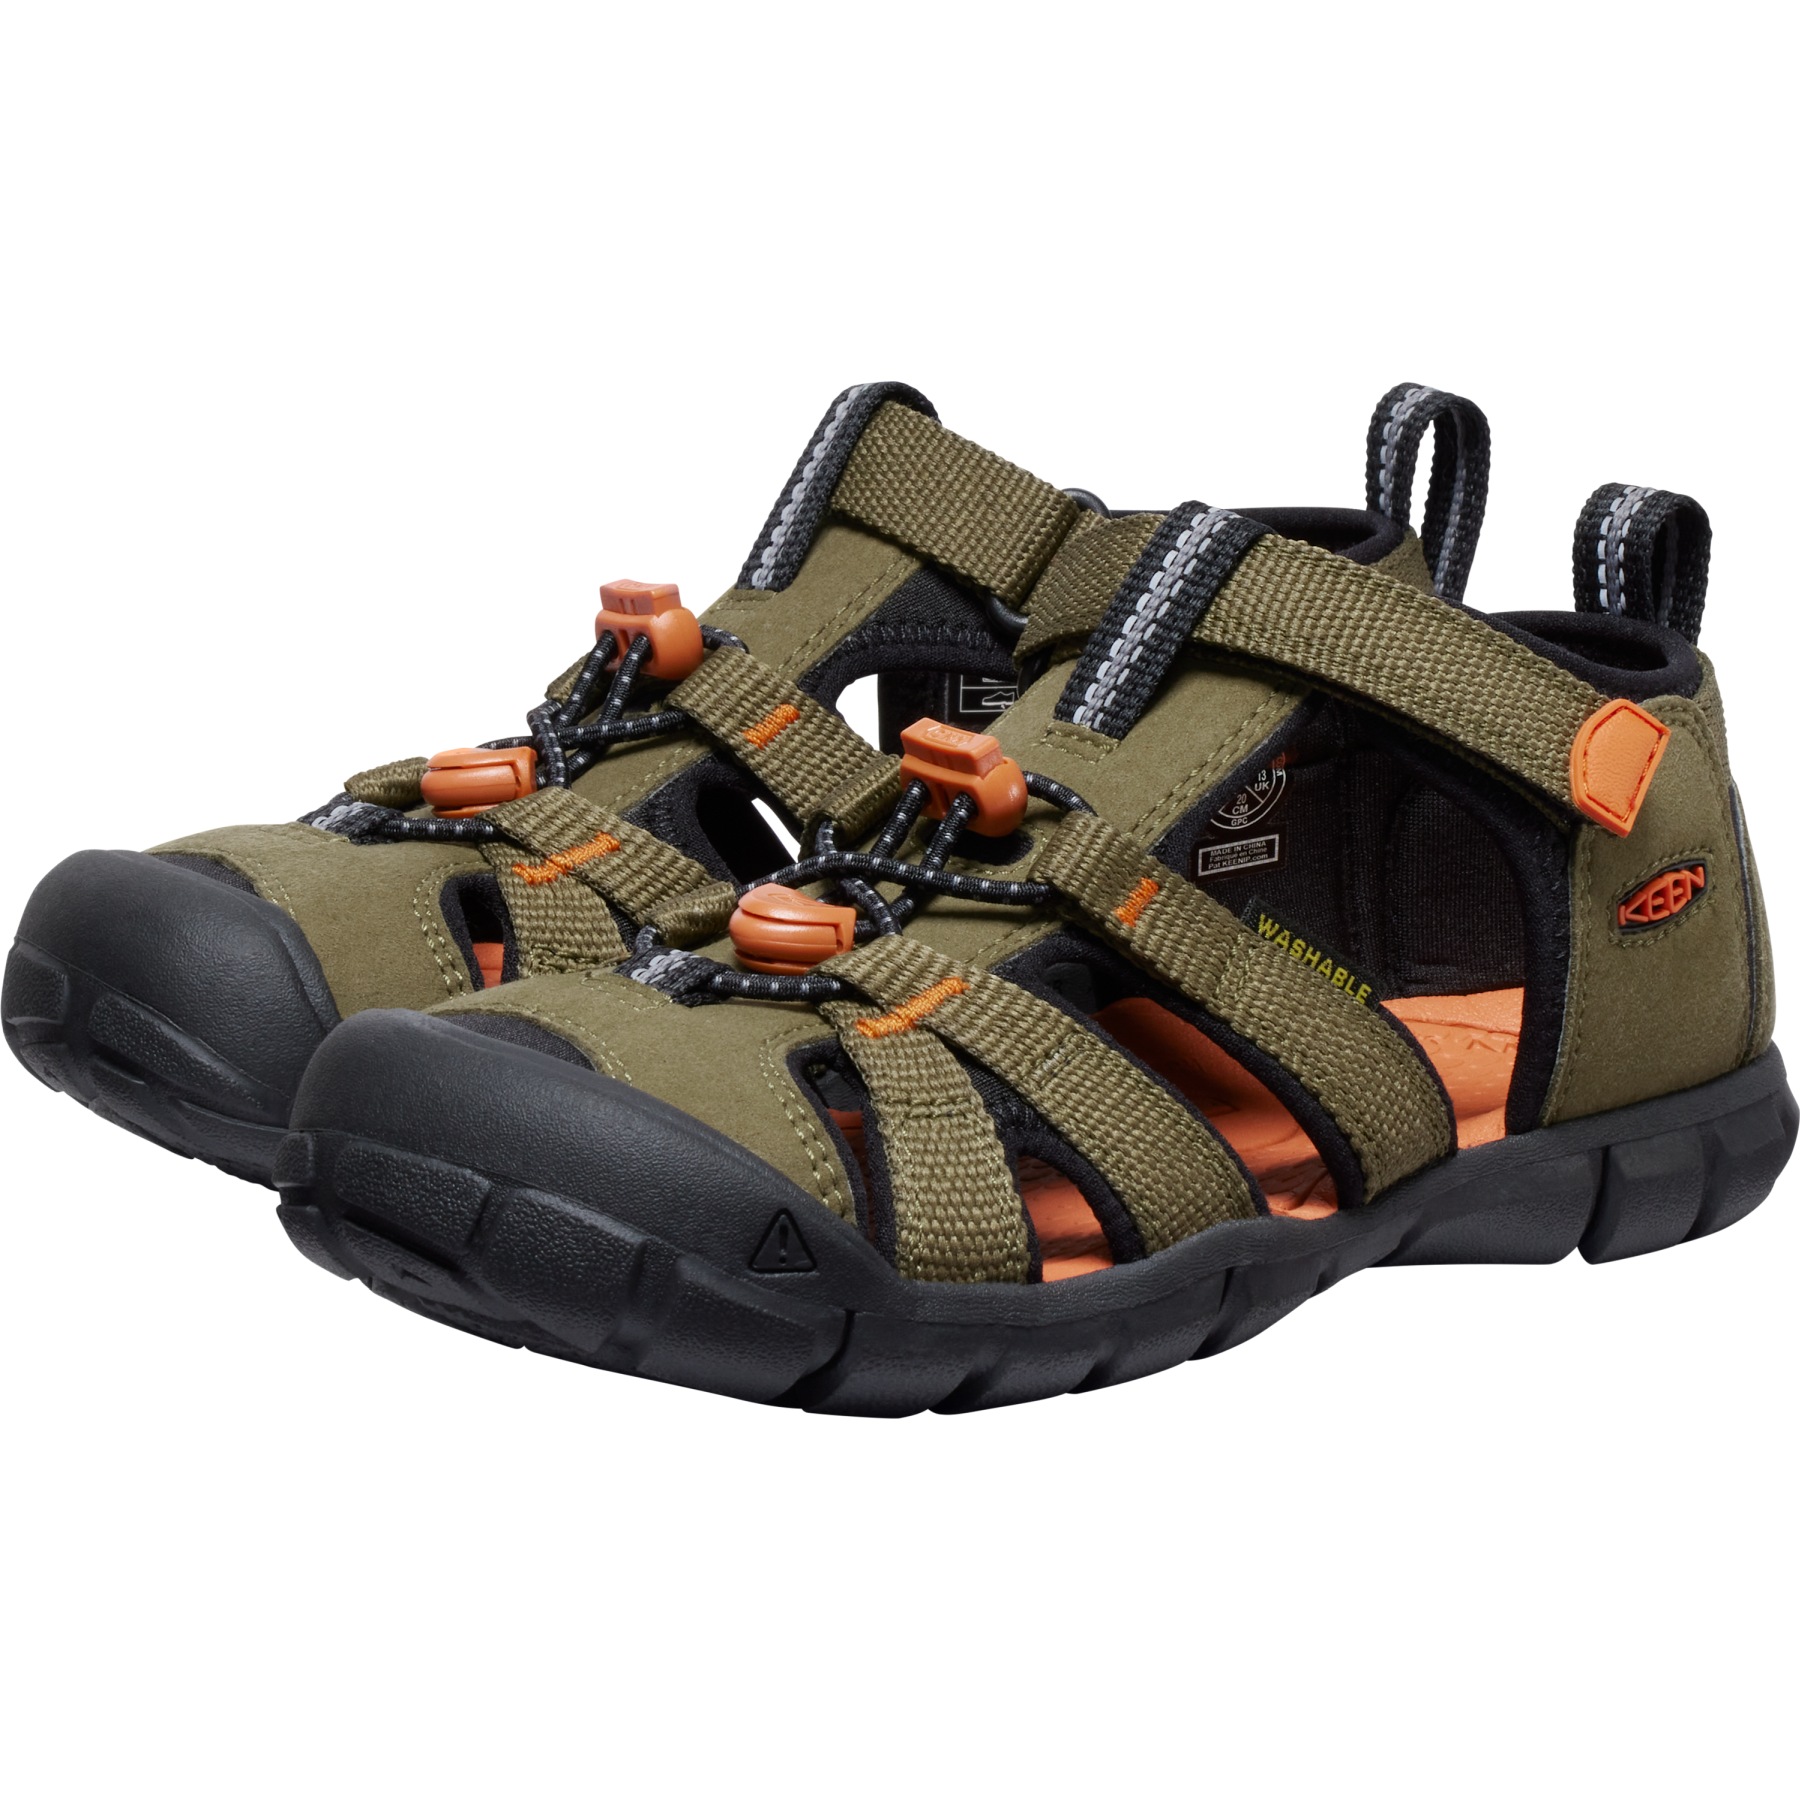 Image of KEEN Seacamp II CNX Youth Sandals Big Kids - Dark Olive/Gold Flame